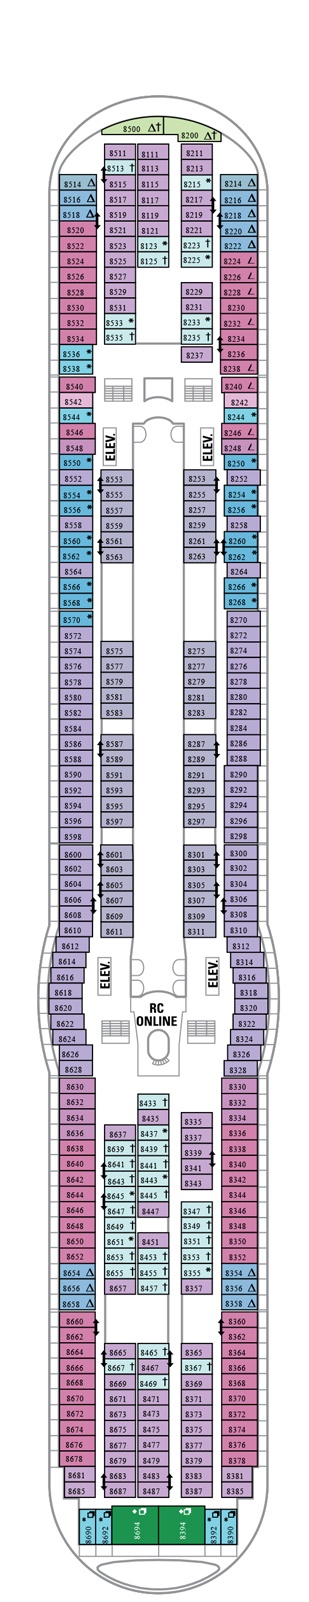 Explorer Of The Seas Deck Plan Cabin Plan From 13 04 2019 Until